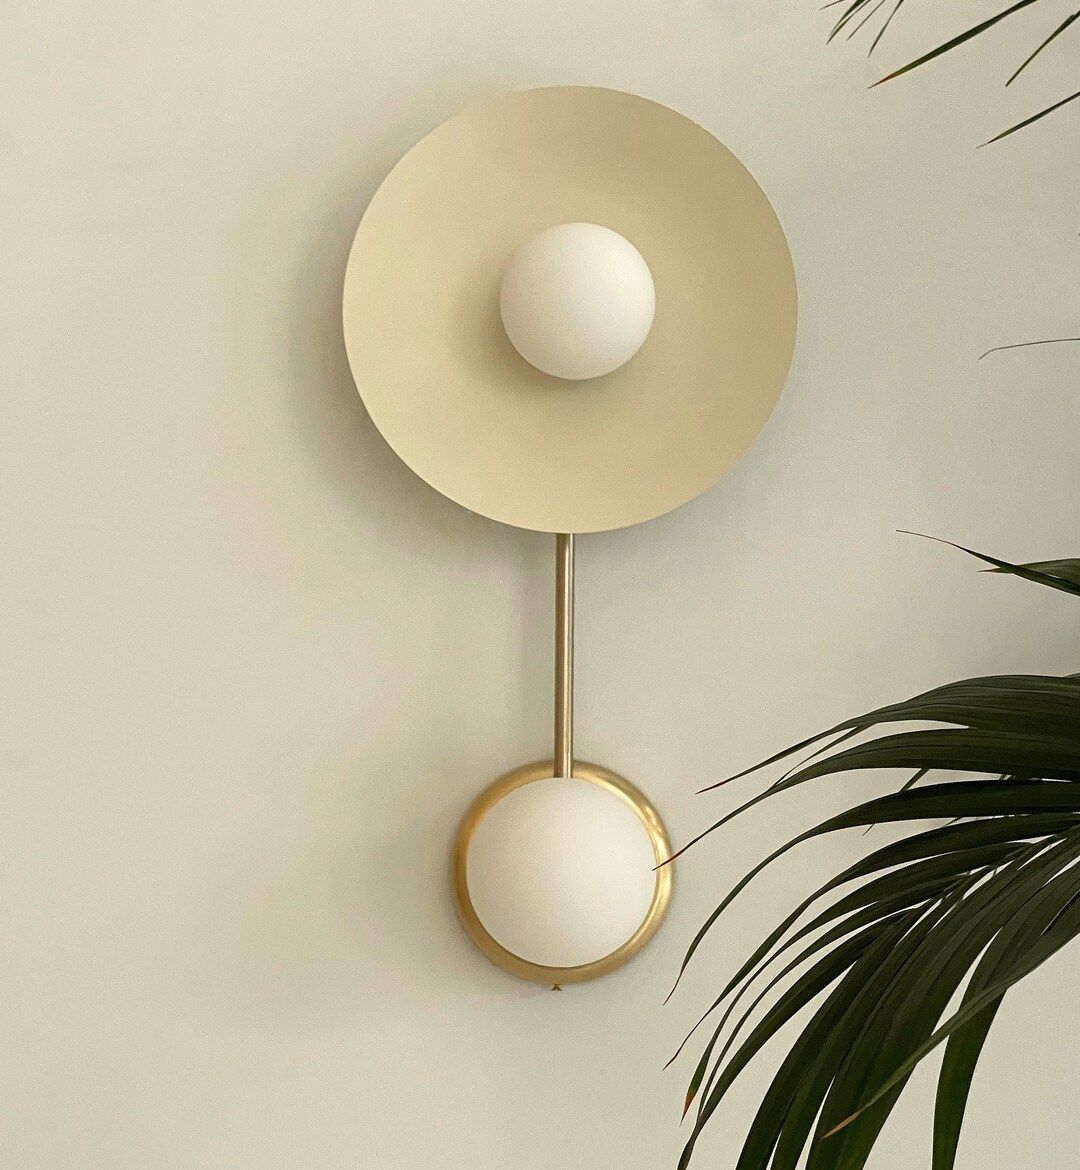 Right Globe Wall Lamp Elegant and Modern Wall Lighting Fixture for Your Home